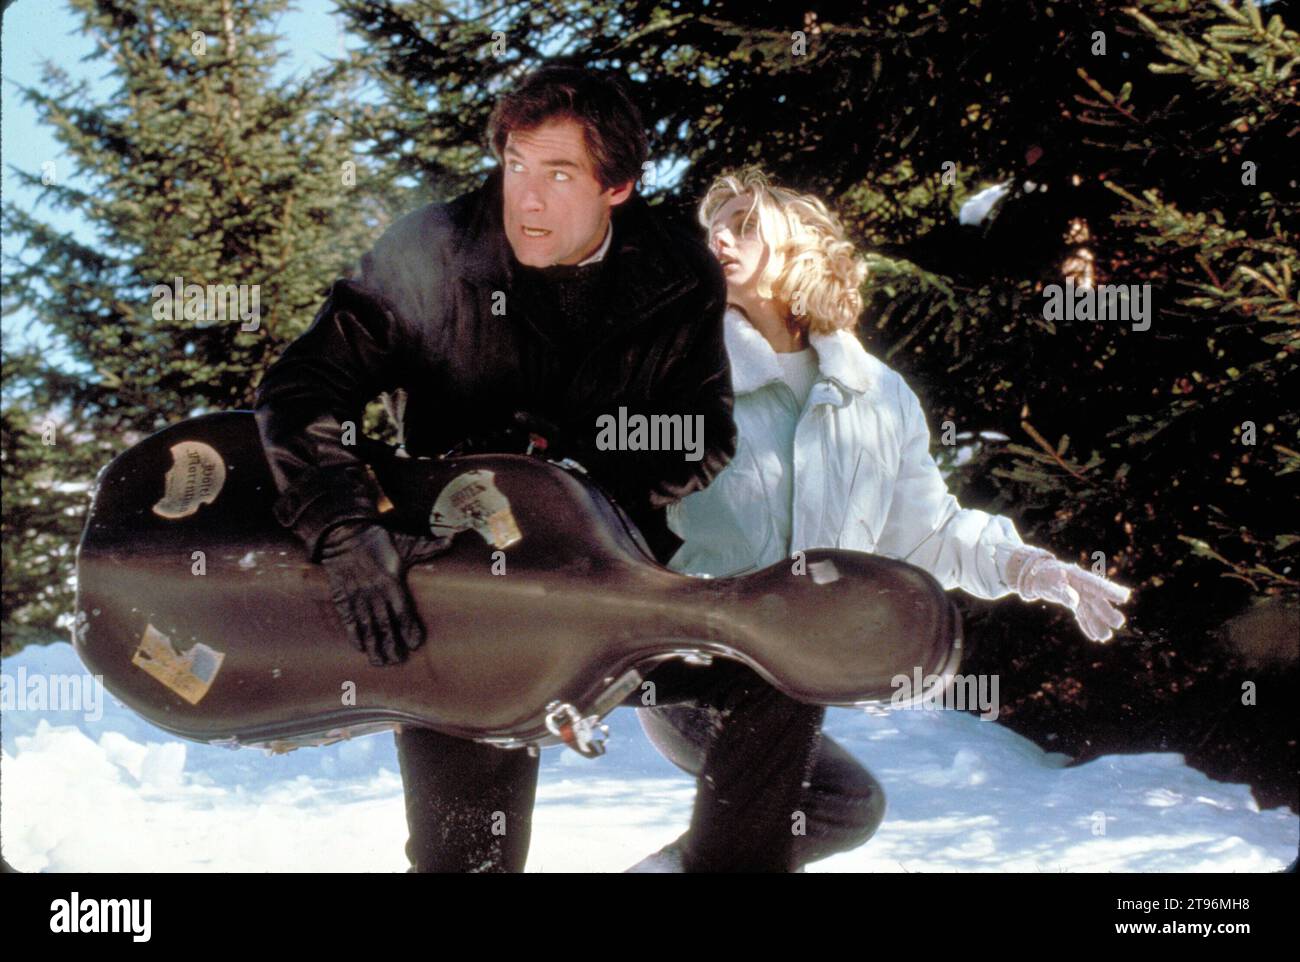 TIMOTHY DALTON and MARYAM D'ABO in 007, JAMES BOND: LIVING DAYLIGHTS, THE (1987) -Original title: THE LIVING DAYLIGHTS-, directed by JOHN GLEN. Credit: M.G.M/UA/EON / Album Stock Photo